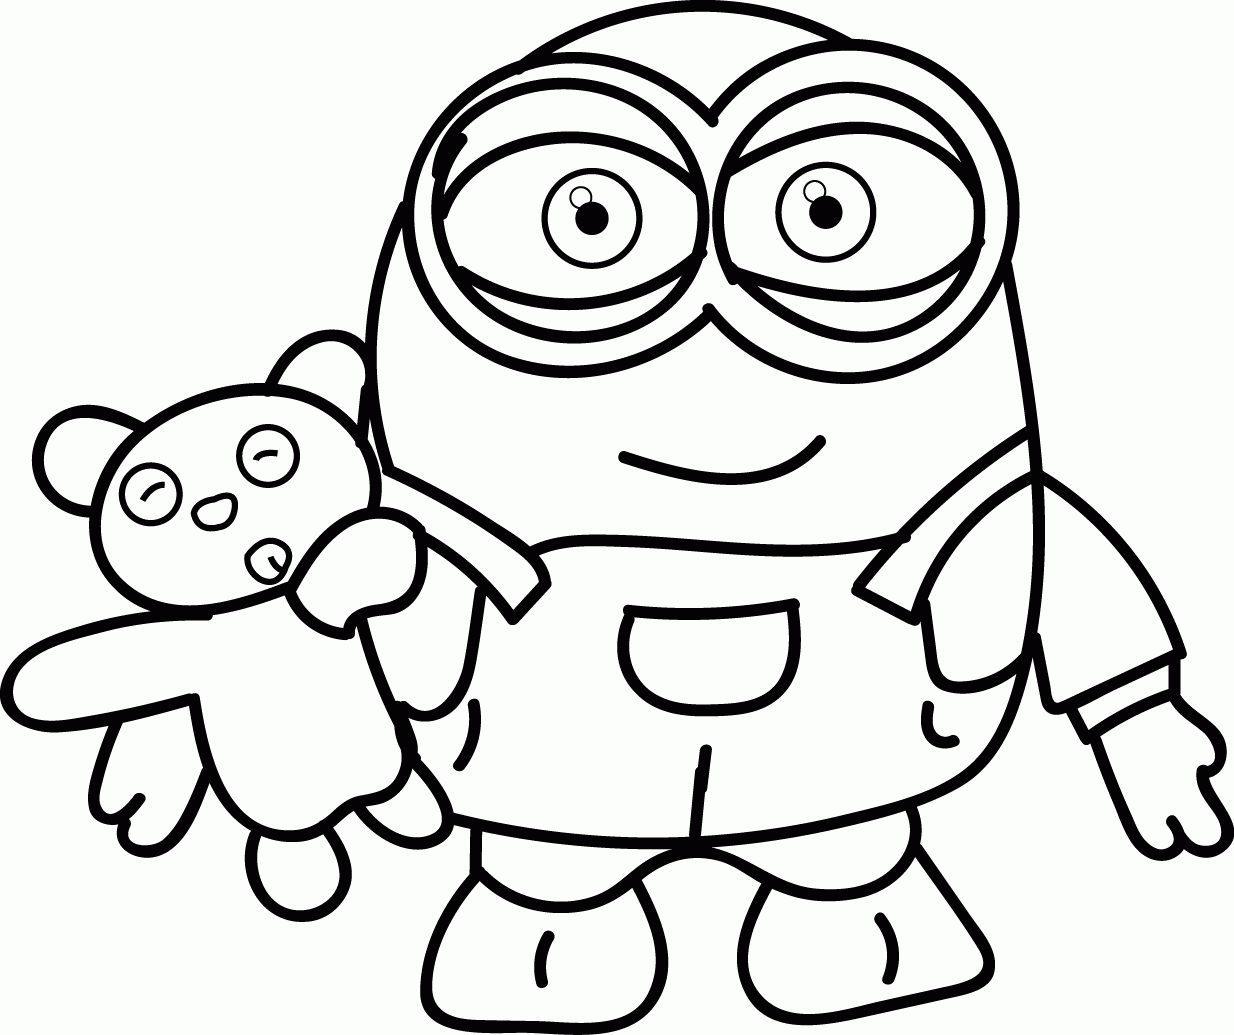 Minions Toy At Hand Coloring Page | Wecoloringpage